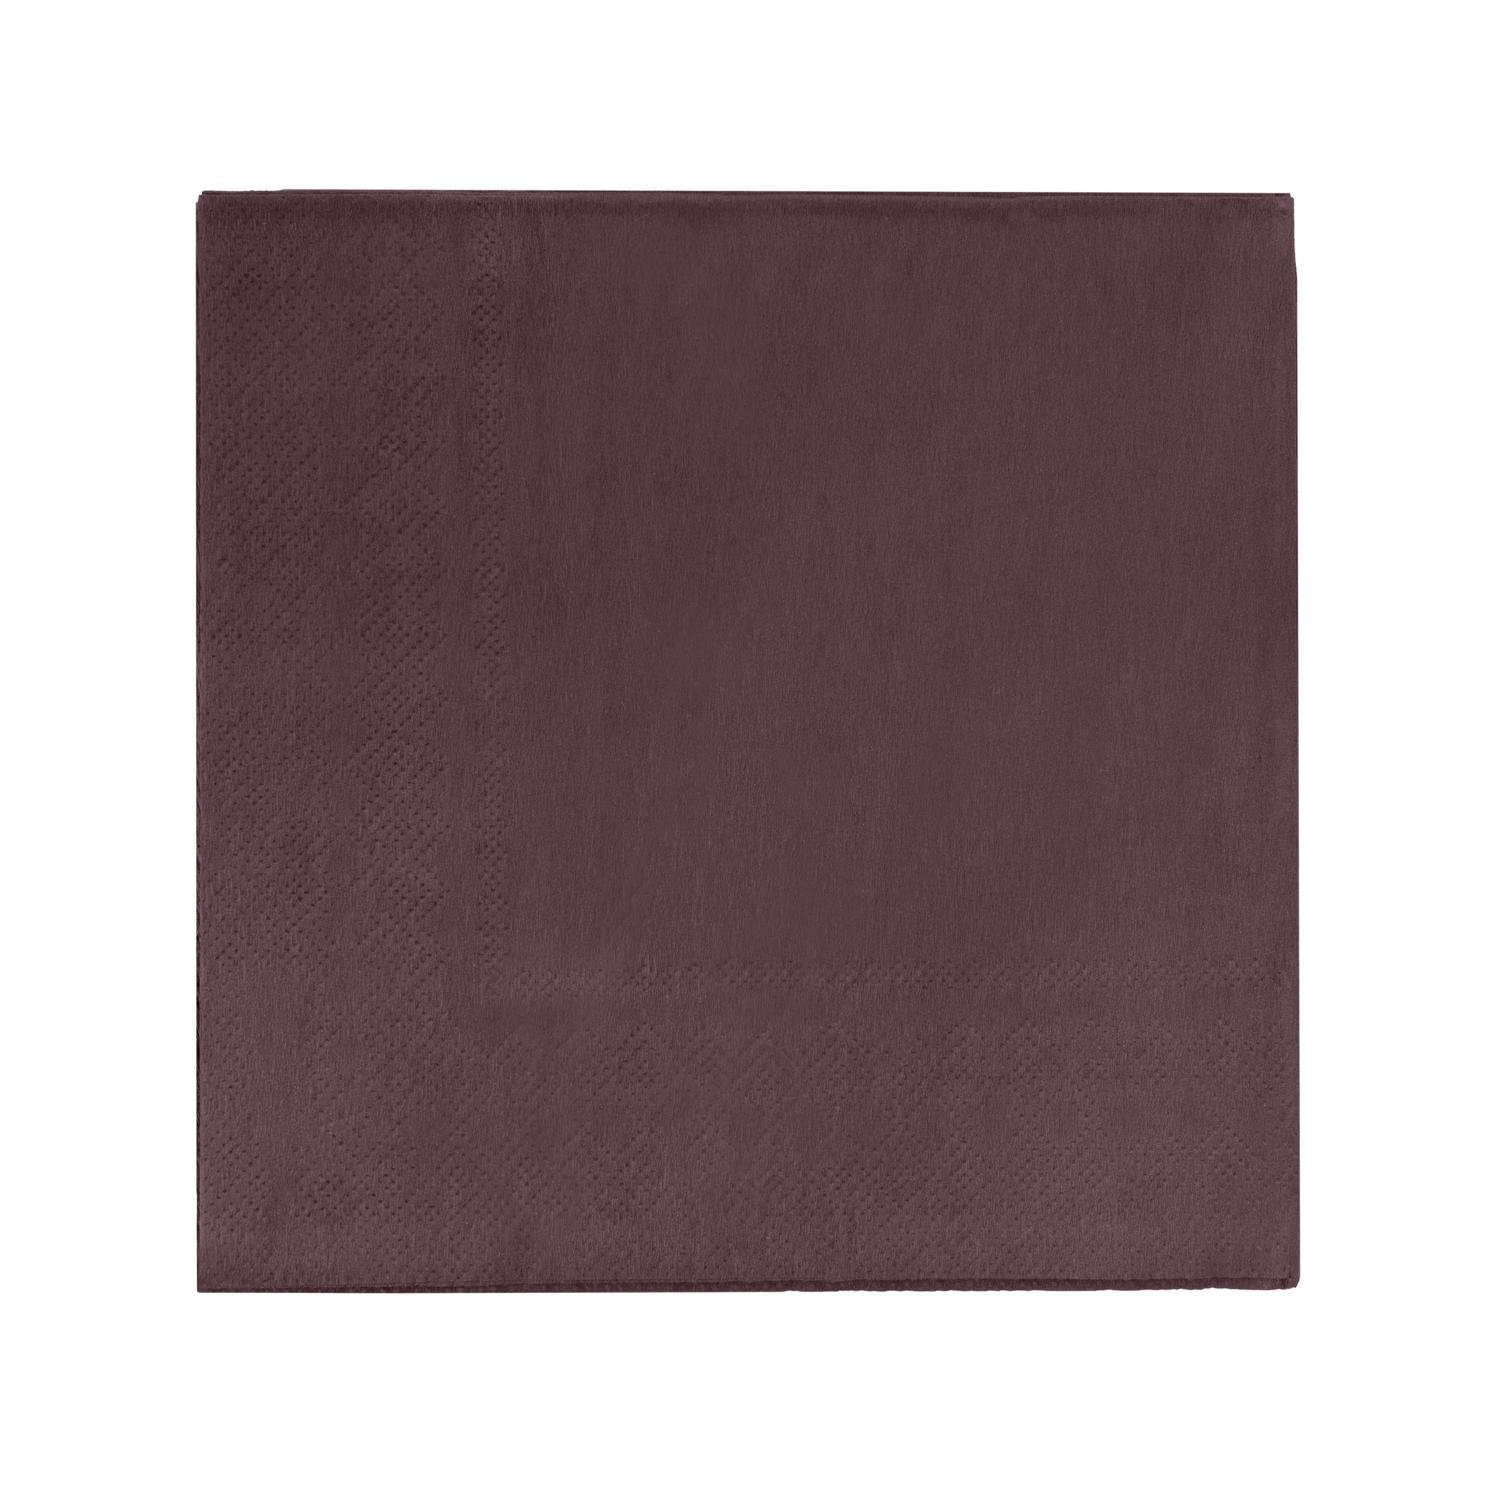 50 ct. 2ply Luncheon Napkin Brown- 3600 ct.